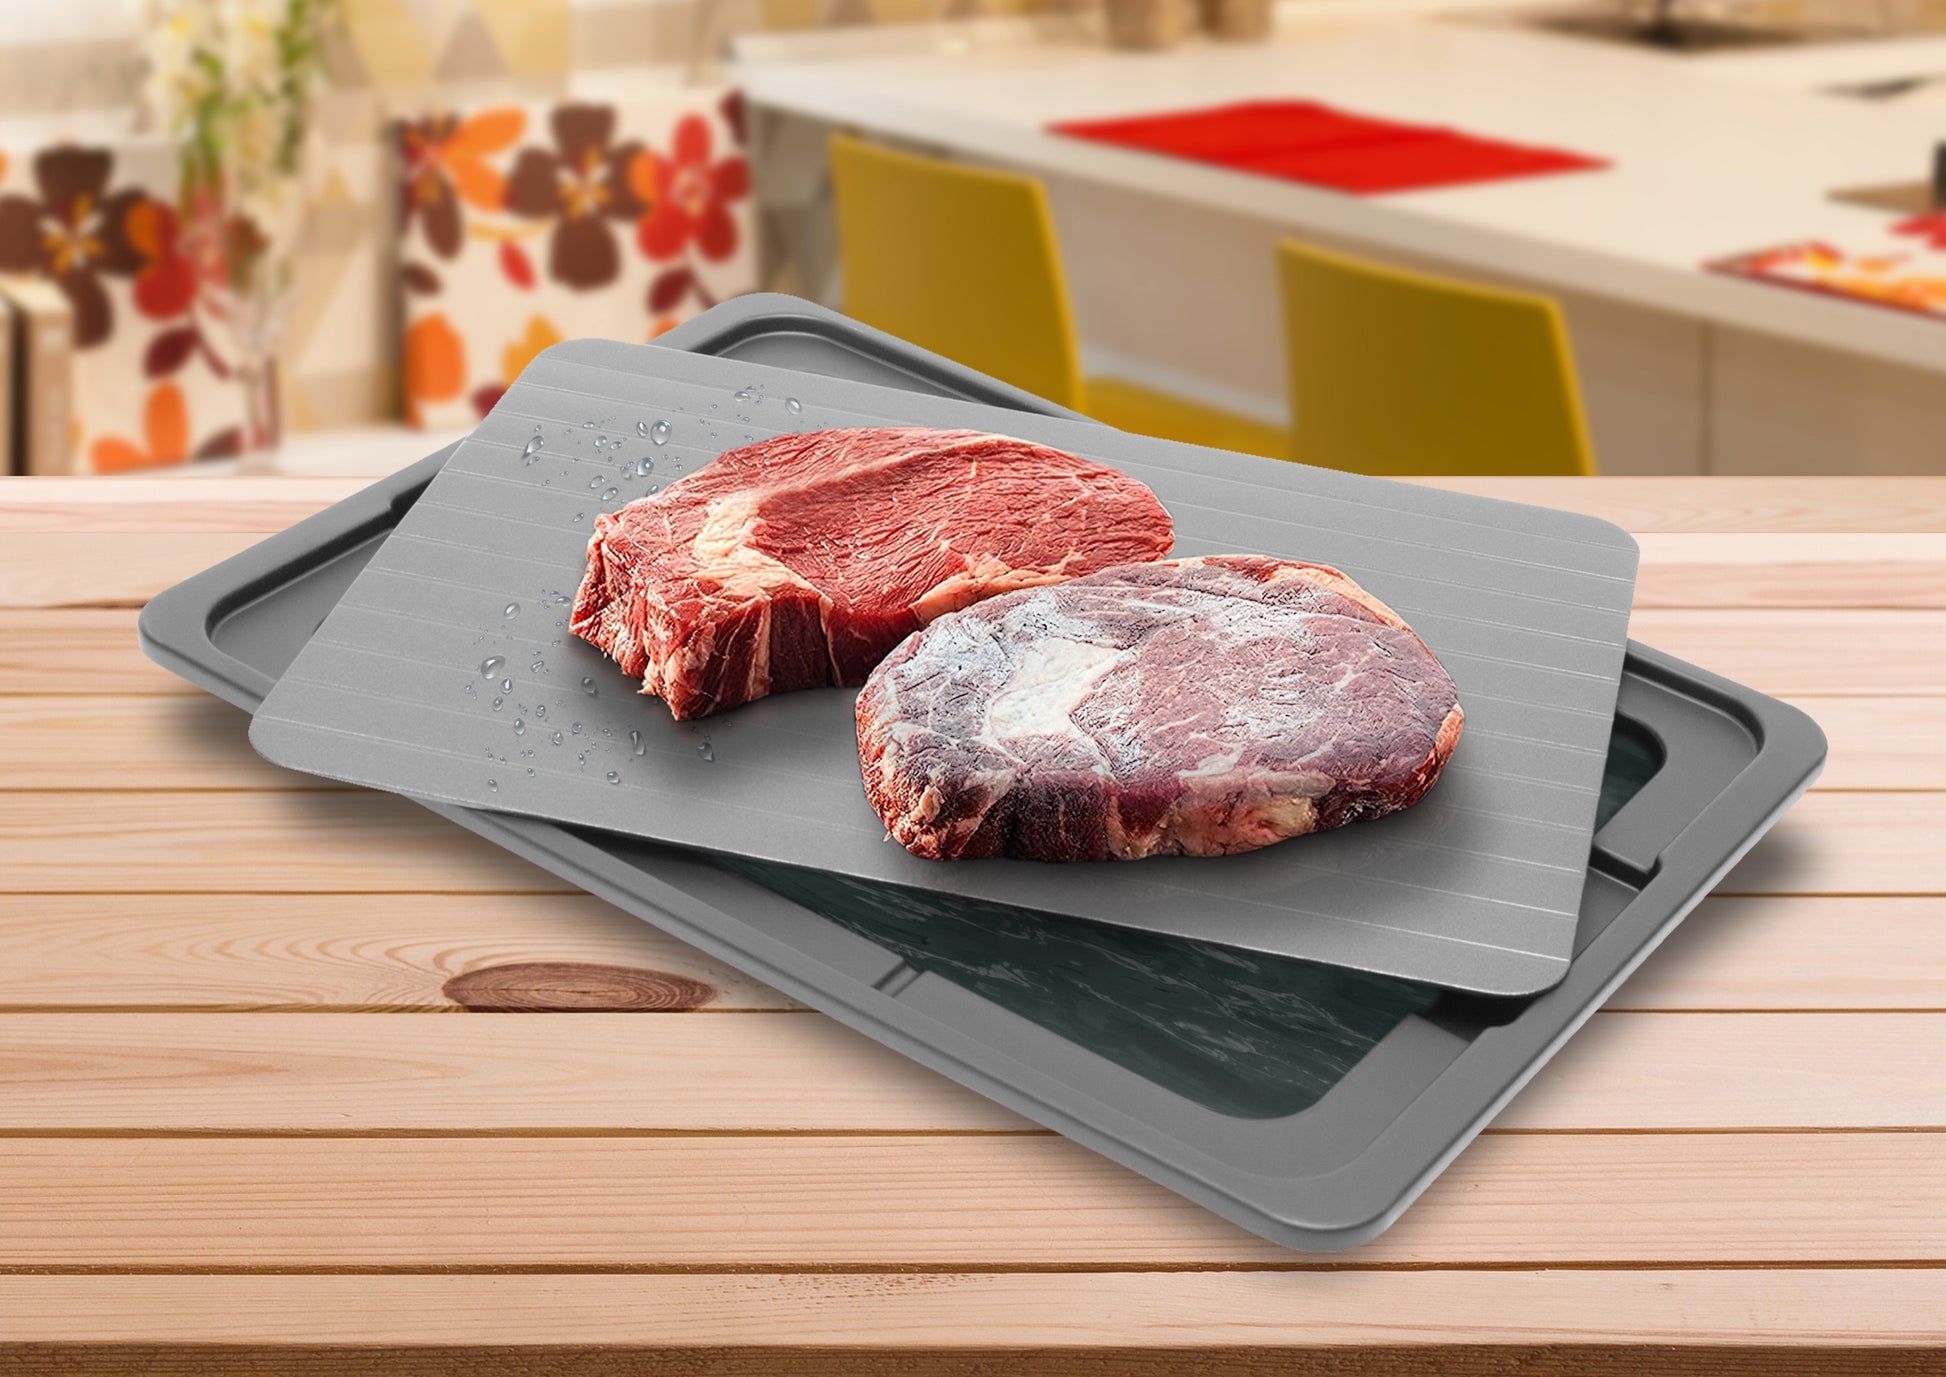 Rapid Defrosting Tray, Defrost Chicken, Steak and Other Meats Quickly, No Mess Tray Included, Thaw Frozen Foods Faster Without a Microwave or Hot Water, Quick and Safe